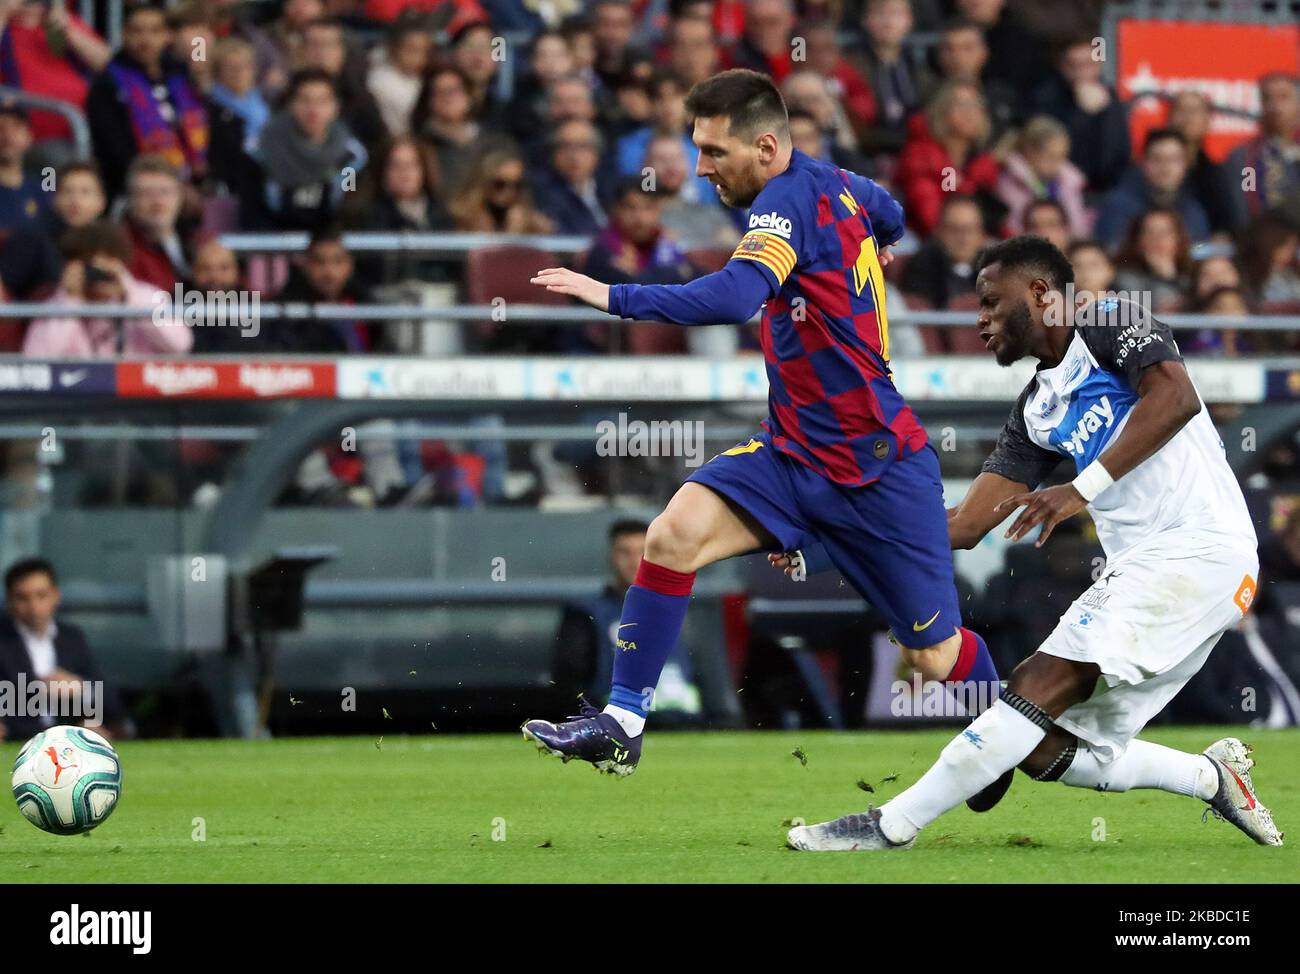 Mubarak Wakaso and Leo Messi during the match between FC Barcelona and Deportivo Alaves, corresponding to the week 18 of the Liga Santander, played at the Camp Nou Stadium, on 21th December 2019, in Barcelona, Spain. -- (Photo by Urbanandsport/NurPhoto) Stock Photo